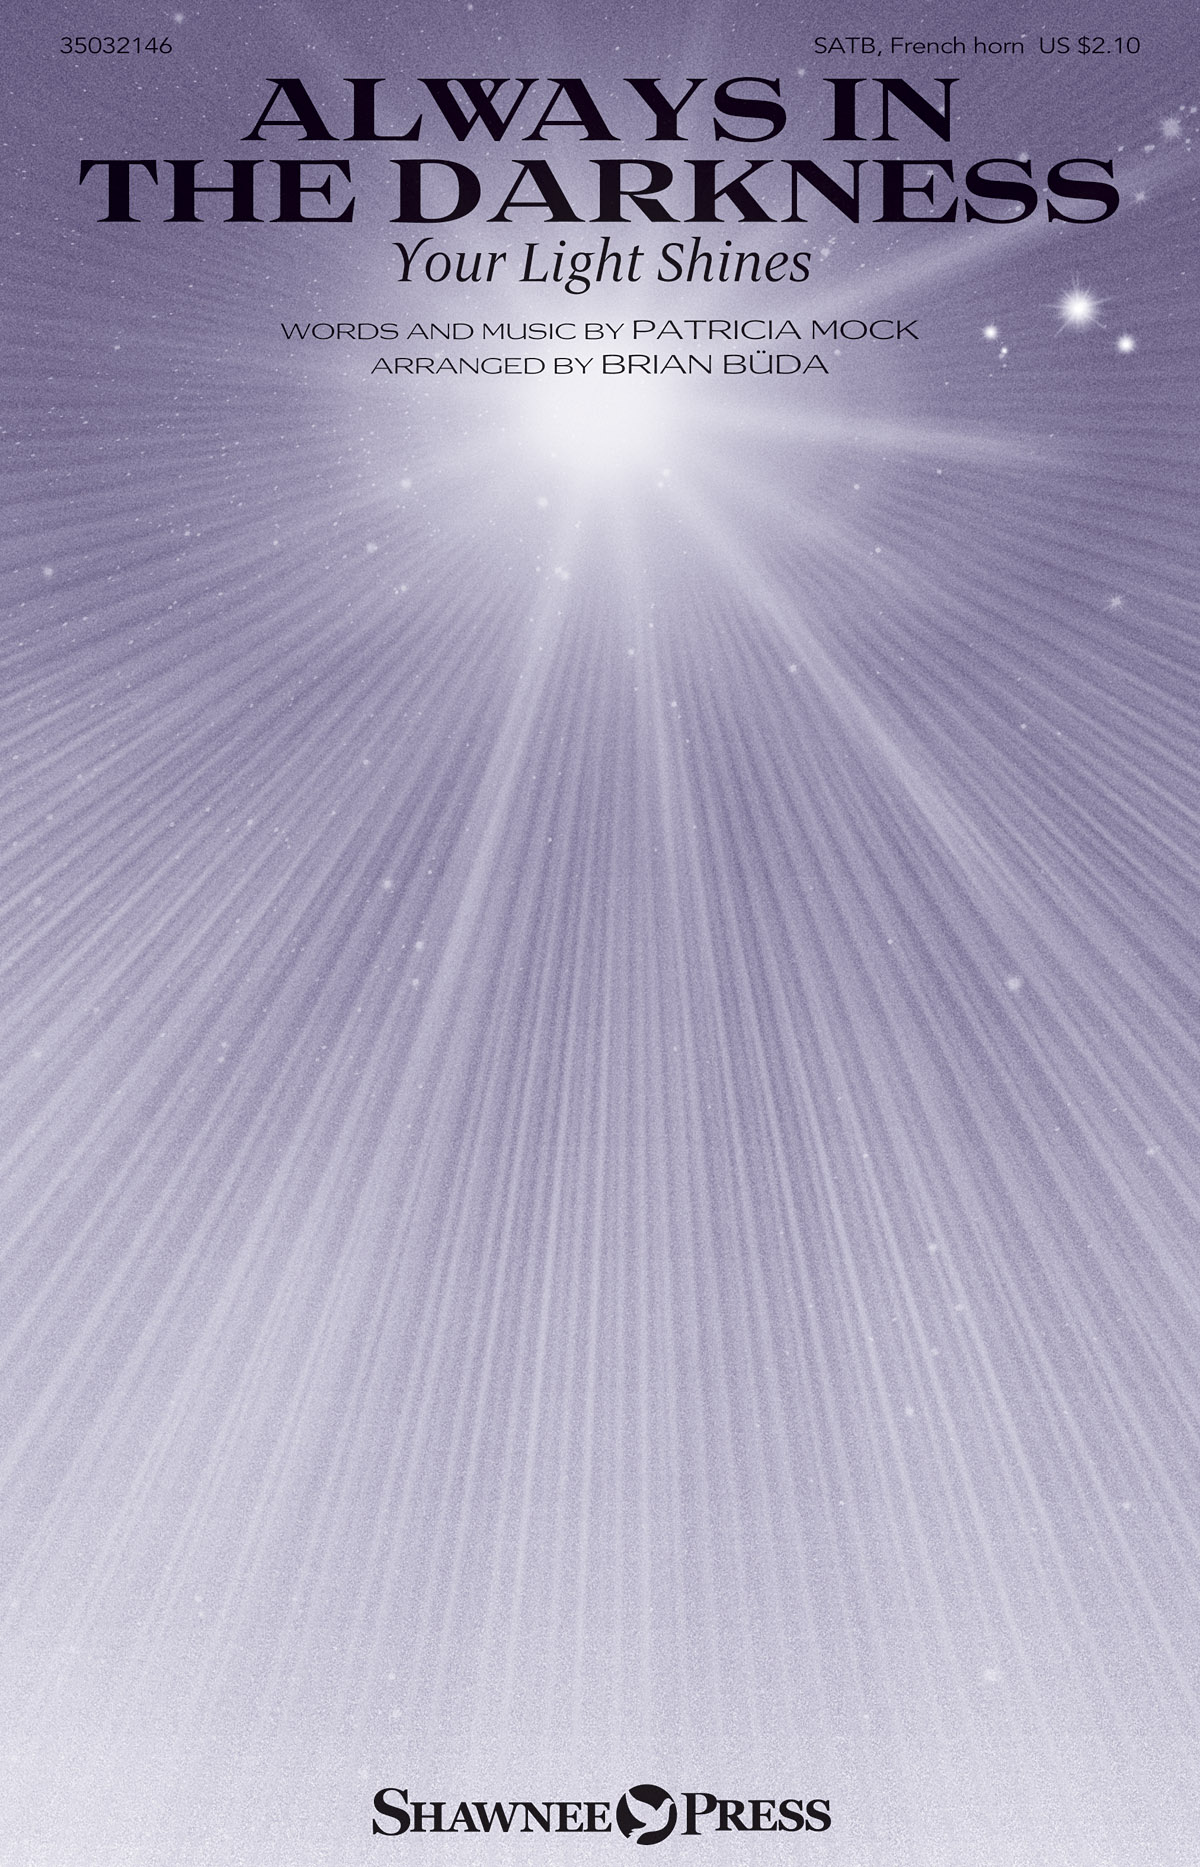 Patricia Mock: Always in the Darkness (Your Light Shines): SATB: Vocal Score